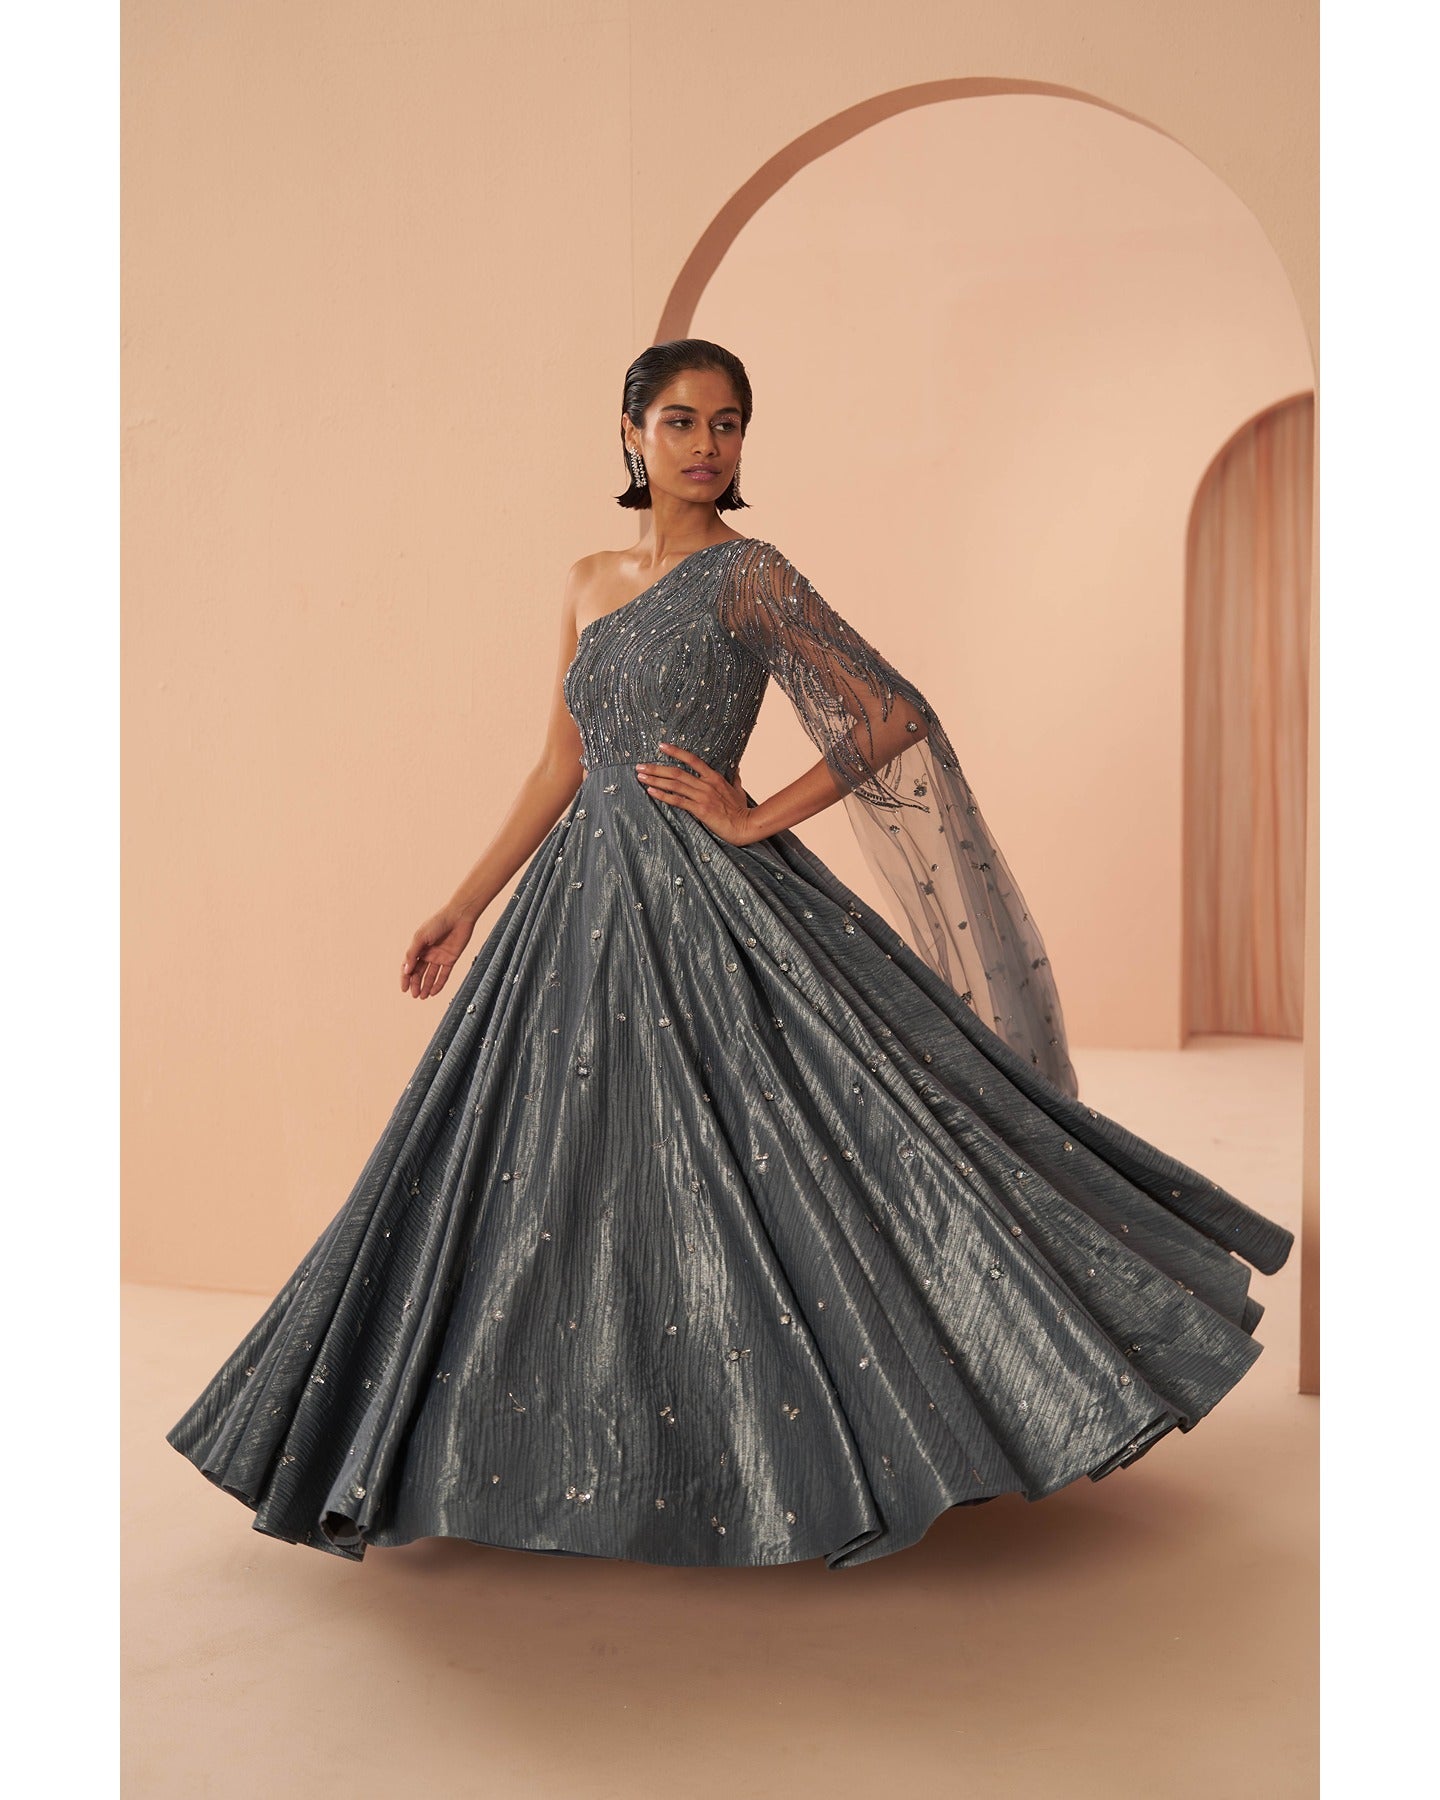 Sapphire Splendor: Hand-embroidered grace adorns this one-shoulder gown in a captivating shade of blue.